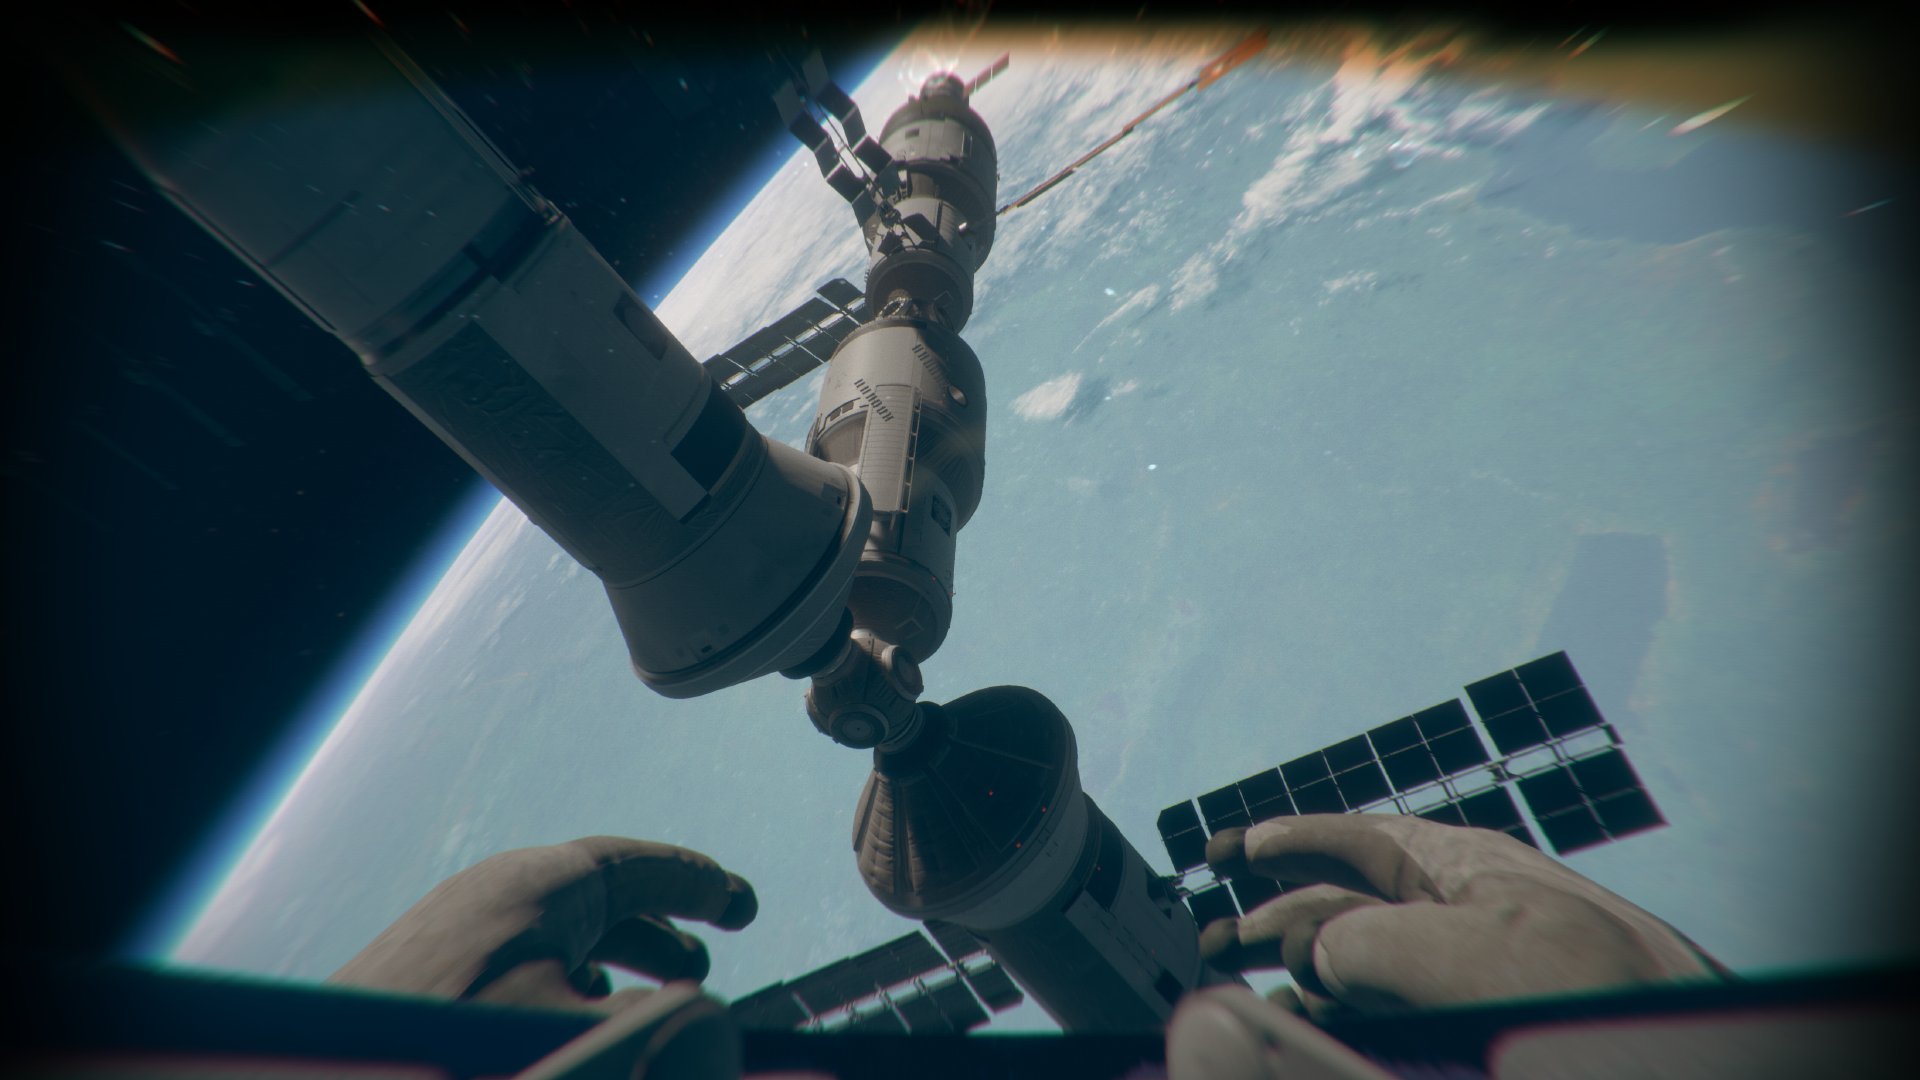 Screenshot of Outreach space exploration game